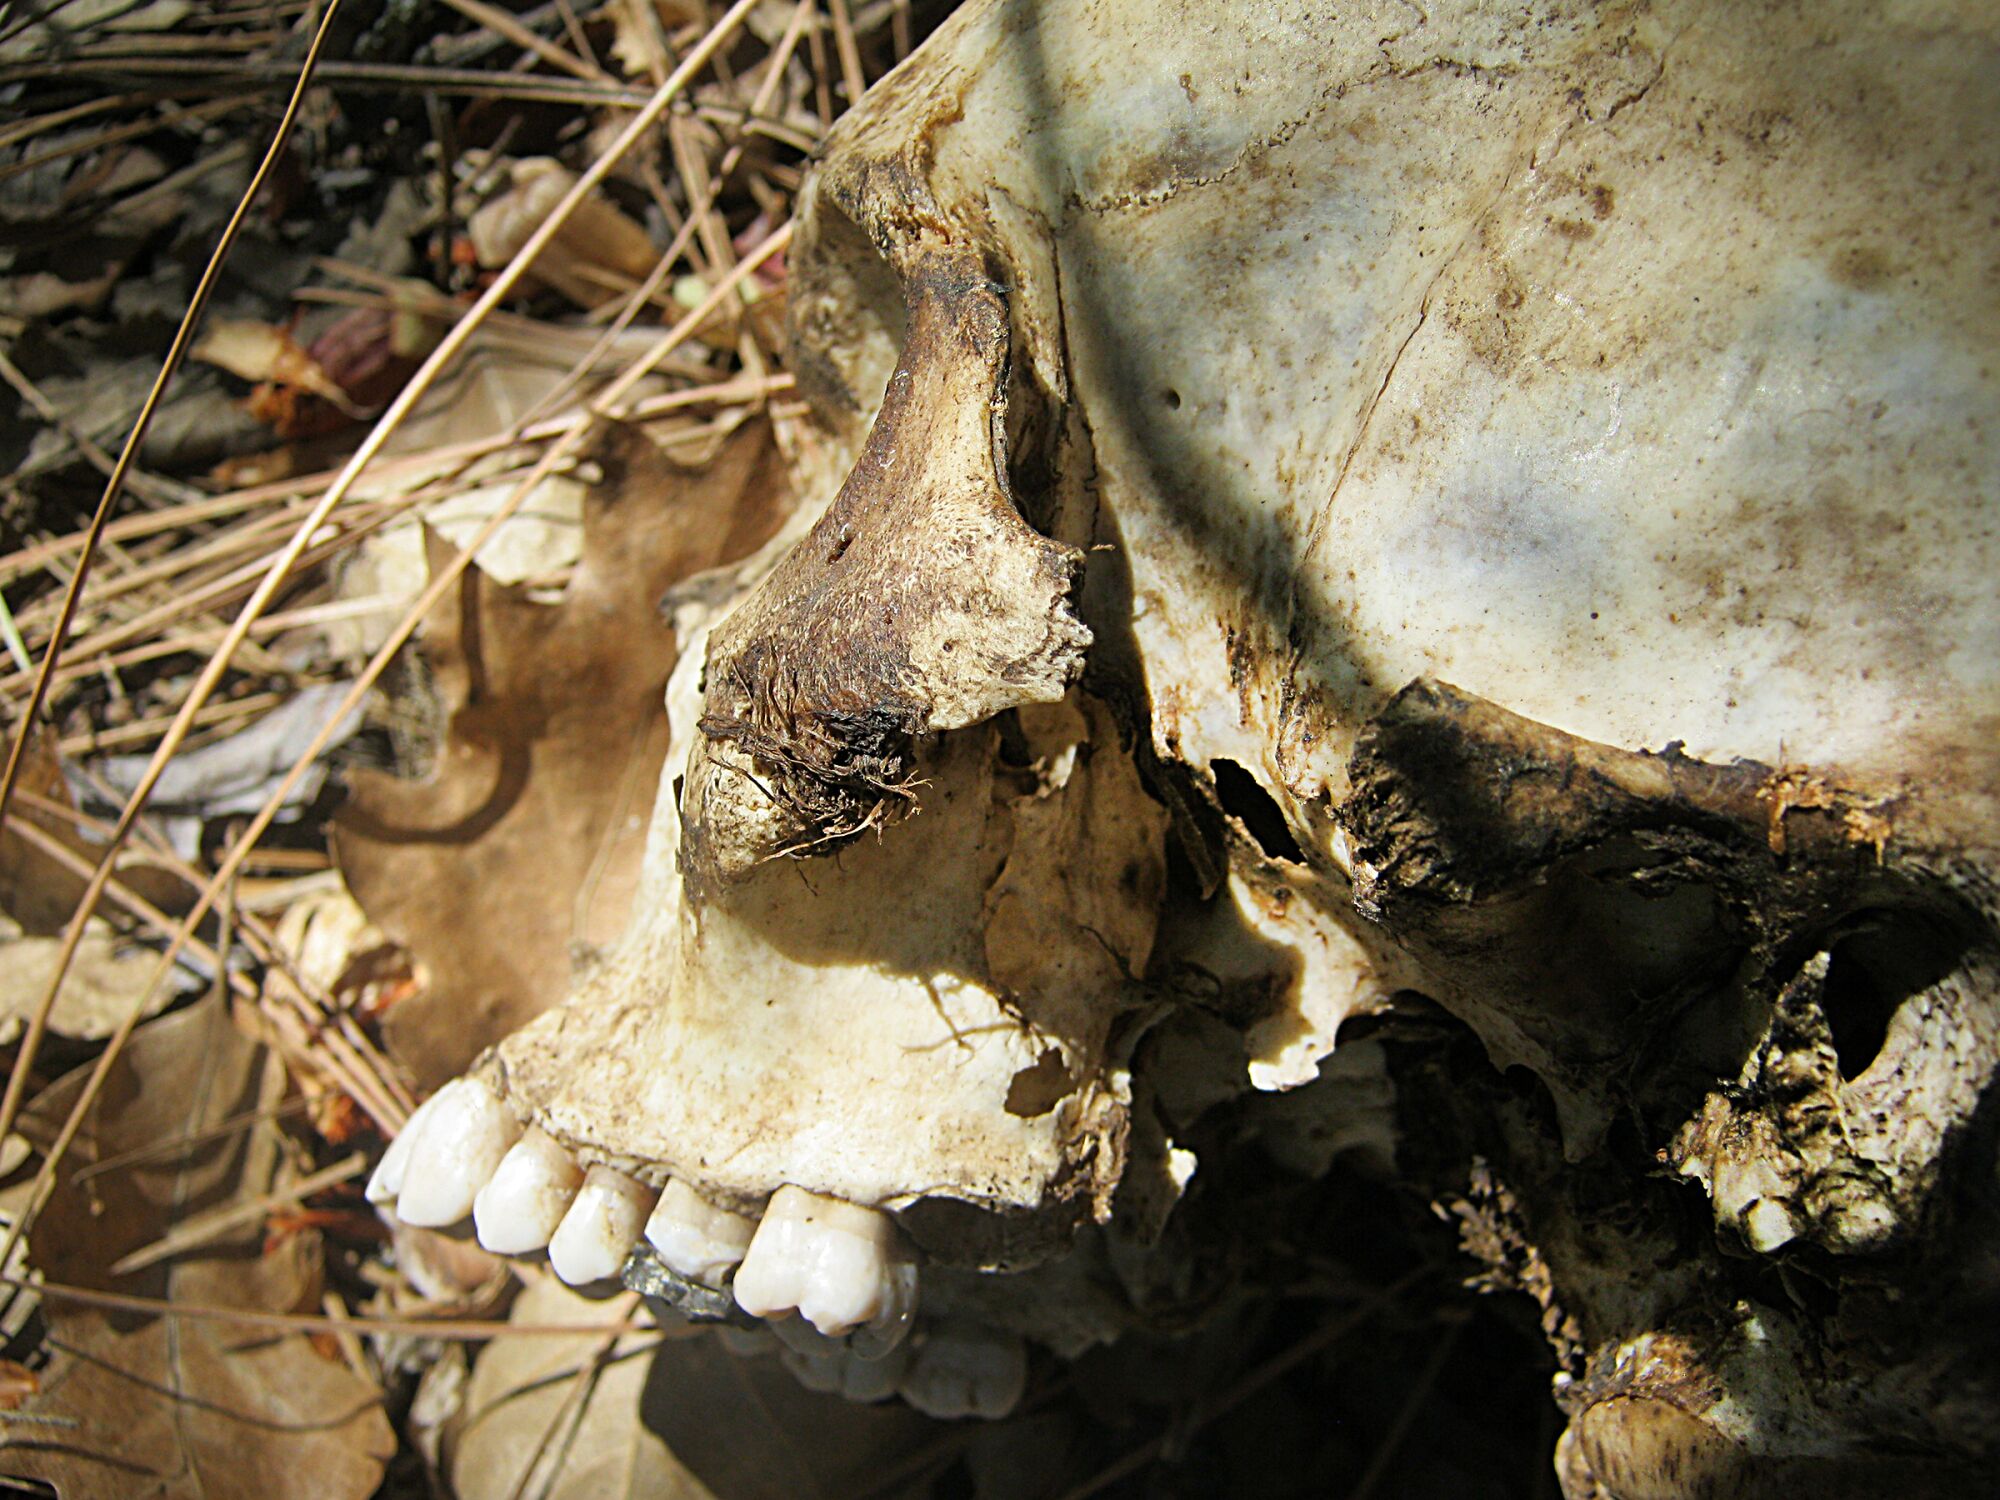 A skull found in August 2013 in Stanislaus National Forest